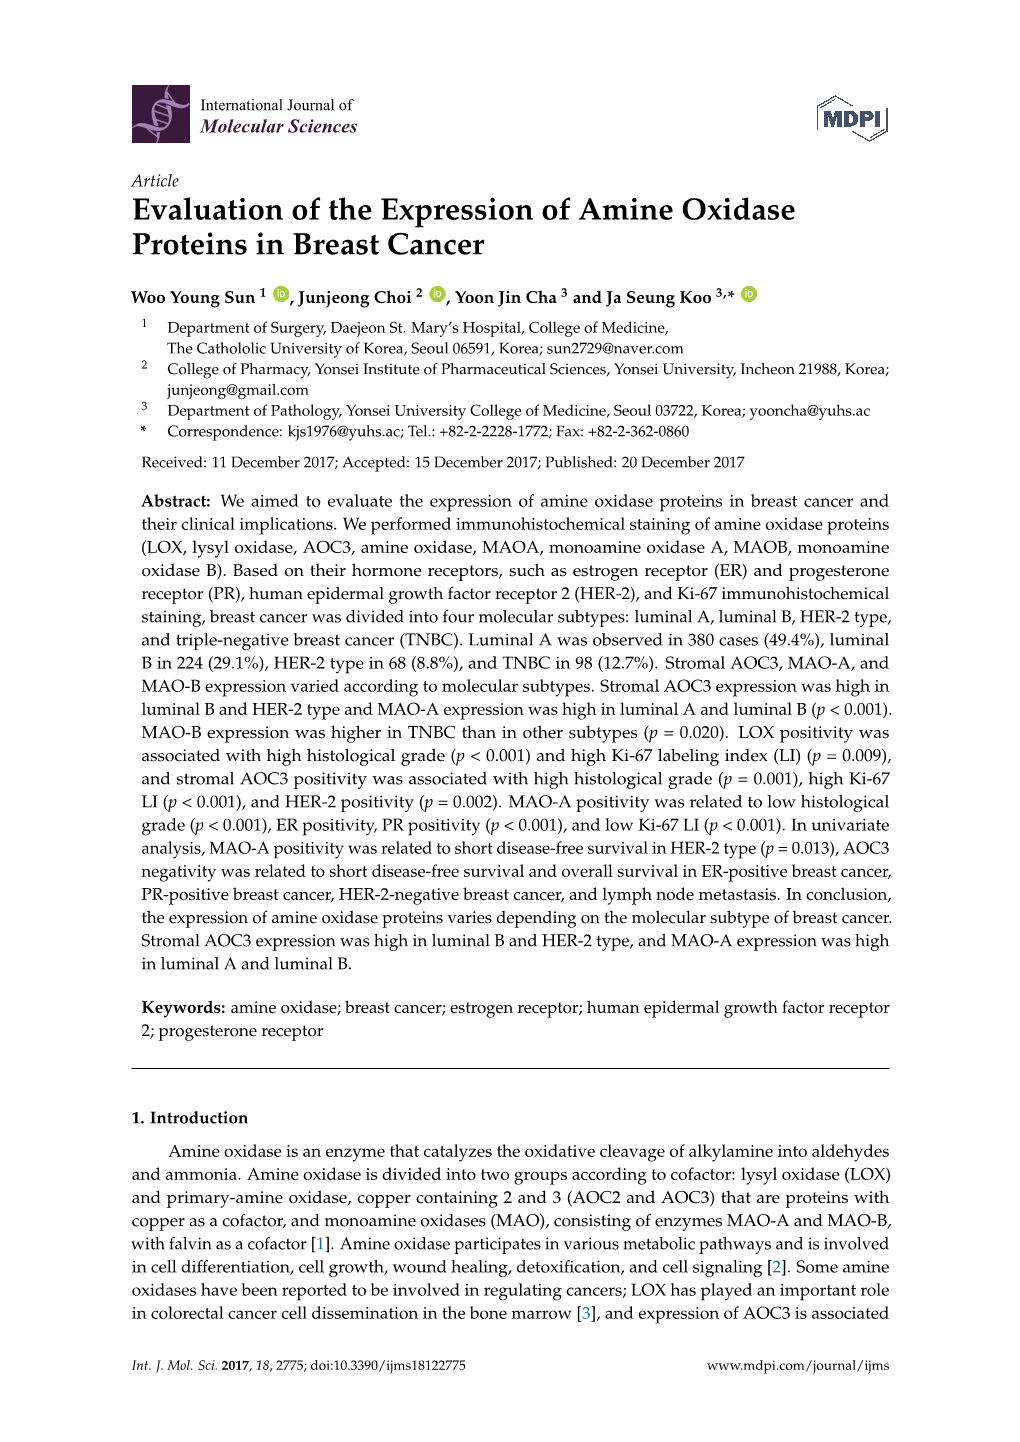 Evaluation of the Expression of Amine Oxidase Proteins in Breast Cancer